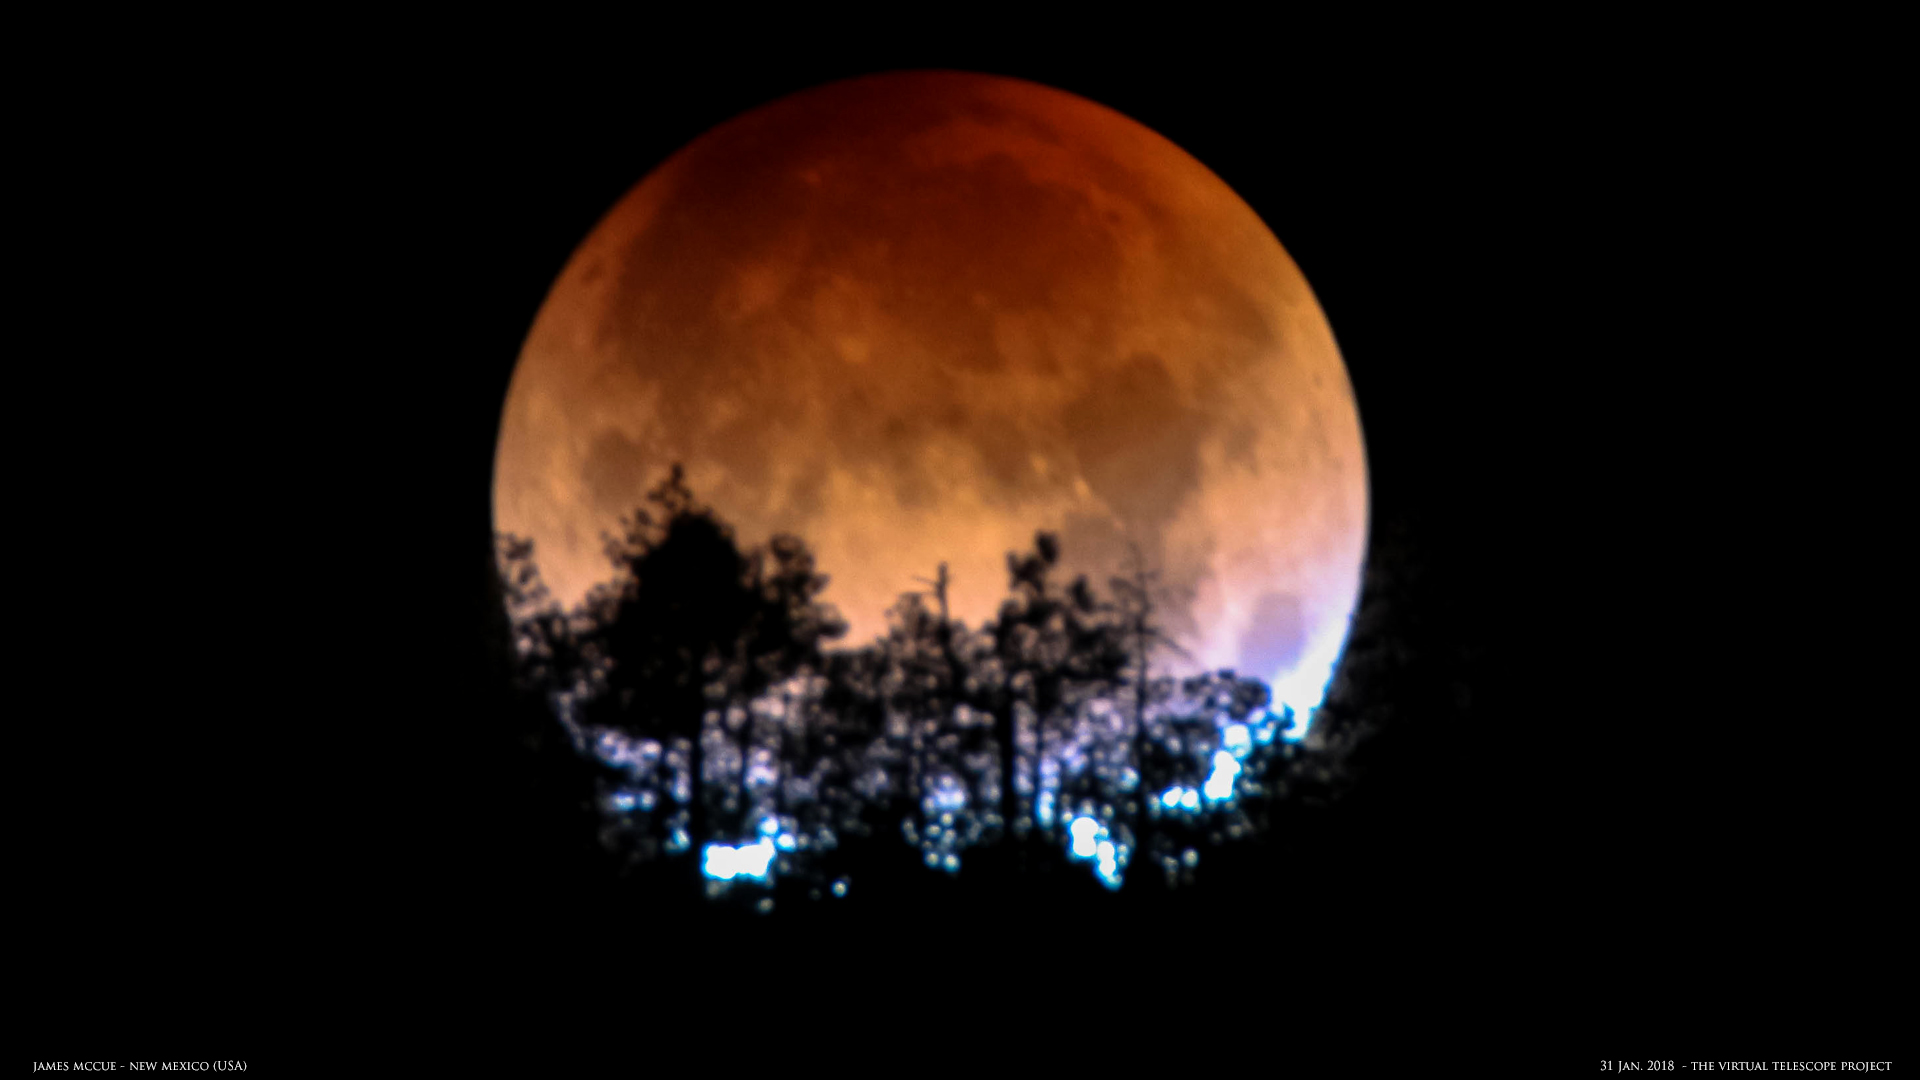 blood moons events